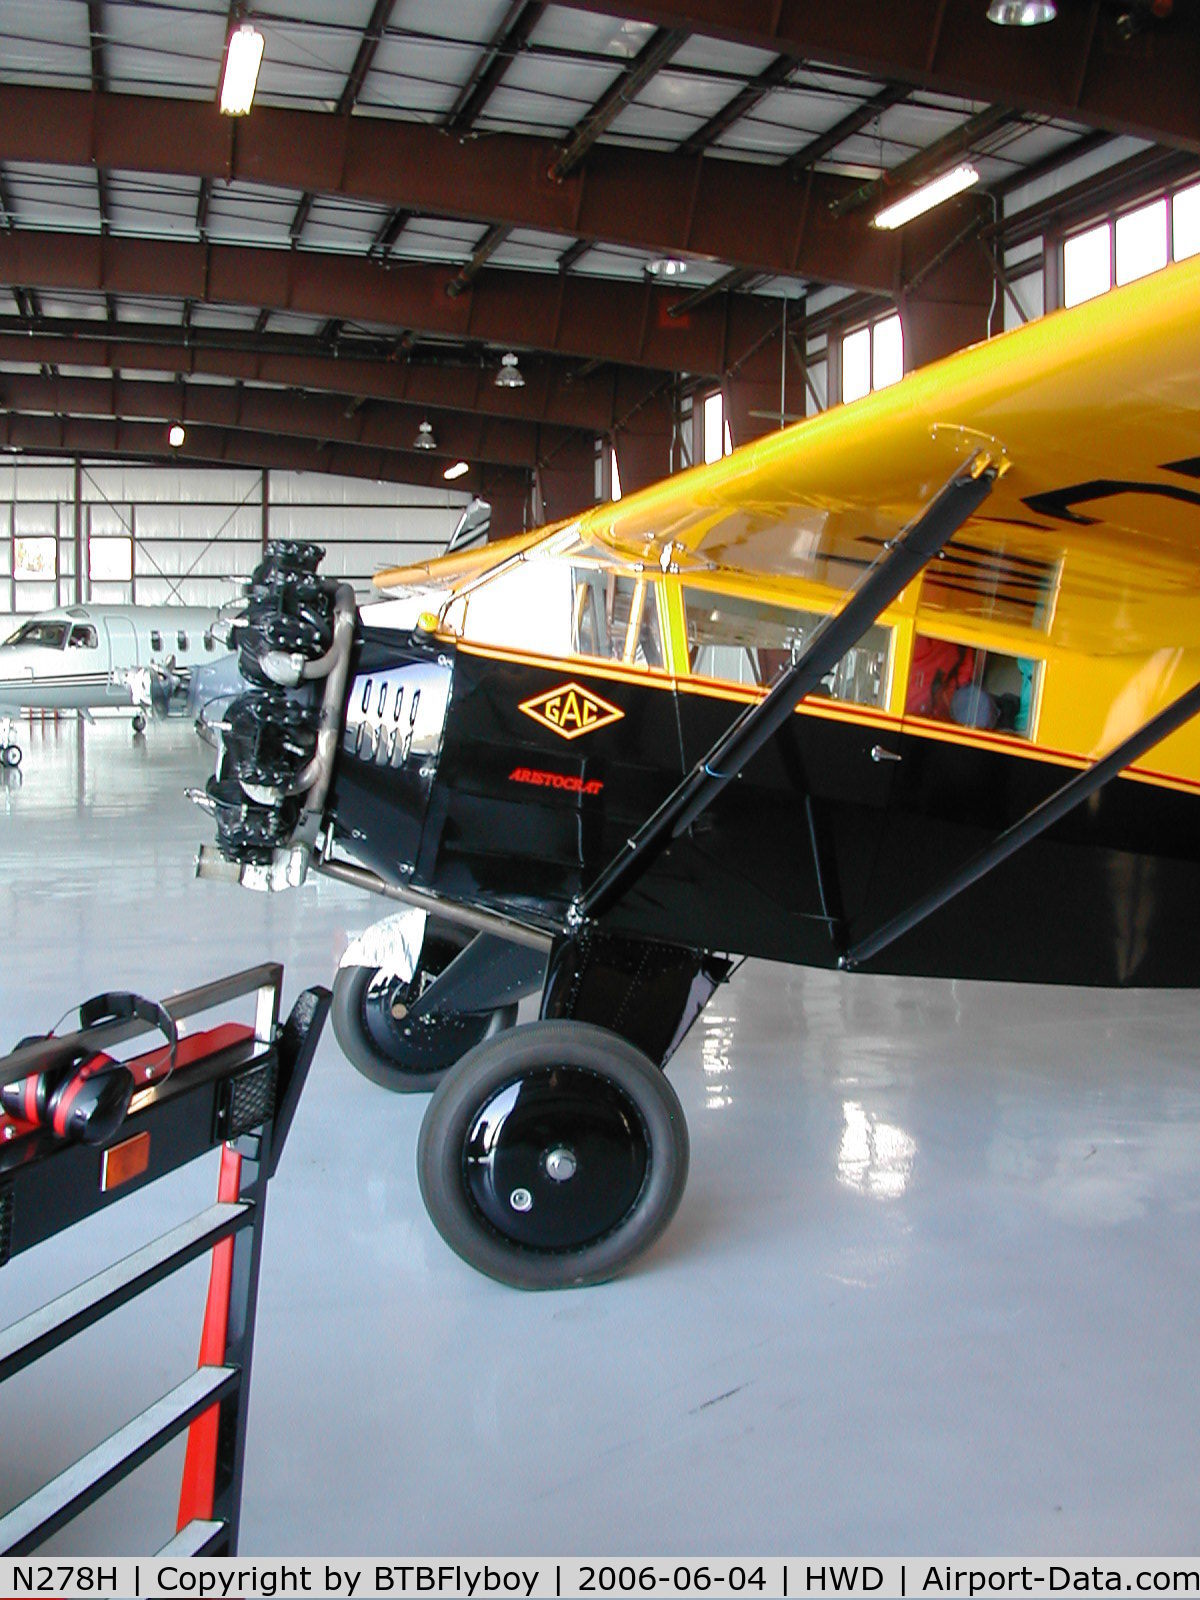 N278H, 1929 General Aircraft Corp 102-A Aristocrat C/N 20, At home in the hangar after the 2006 Merced Antique Fly-in